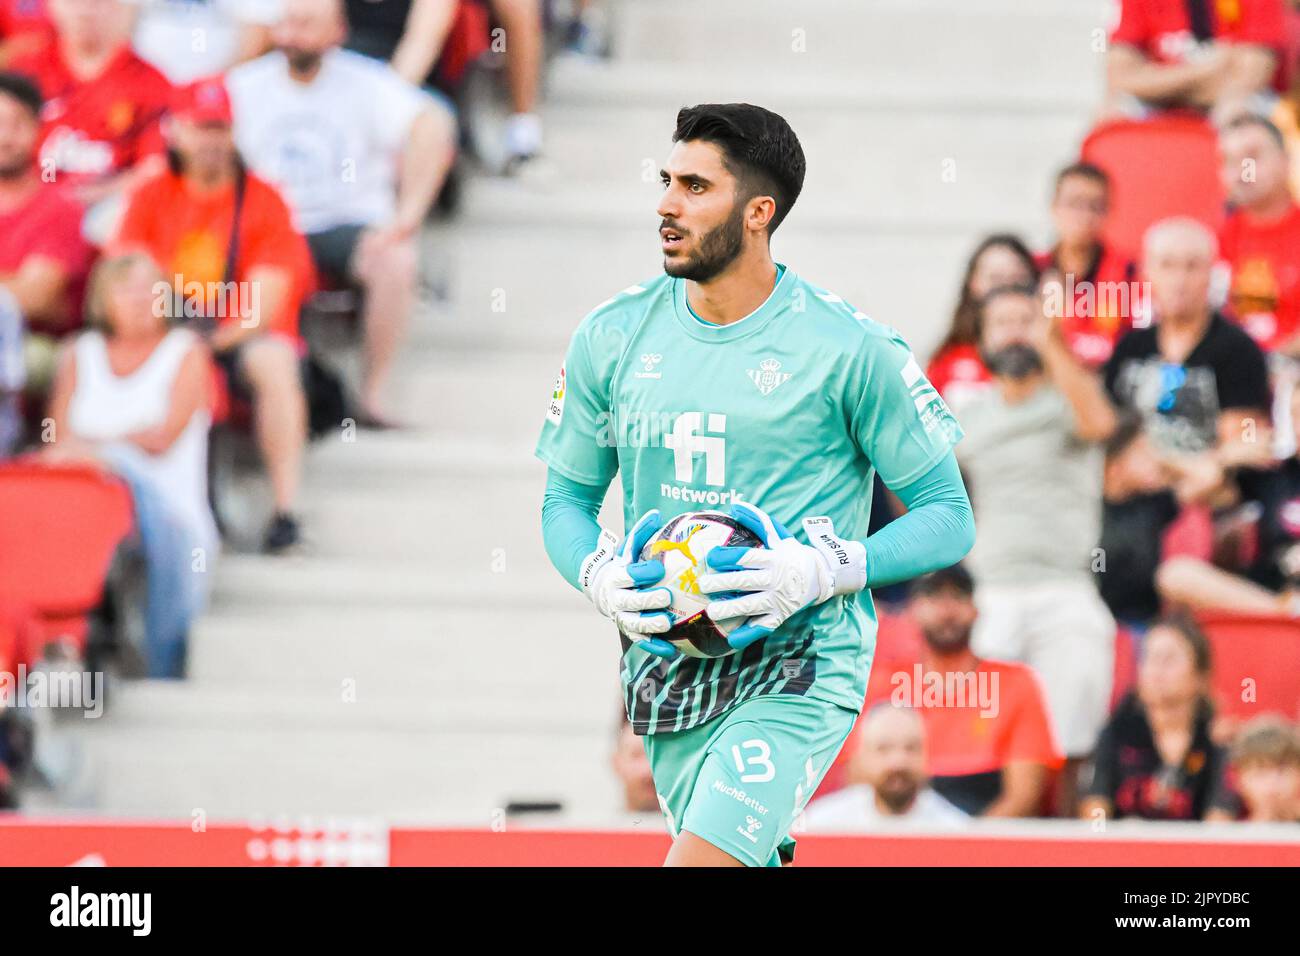 MALLORCA, SPAIN - AUGUST 20: Rui Silva of Real Betis in the match between RCD Mallorca and Real Betis of La Liga Santander on August 20, 2022 at Visit Mallorca Stadium Son Moix in Mallorca, Spain. (Photo by Samuel Carreño/PxImages) Stock Photo